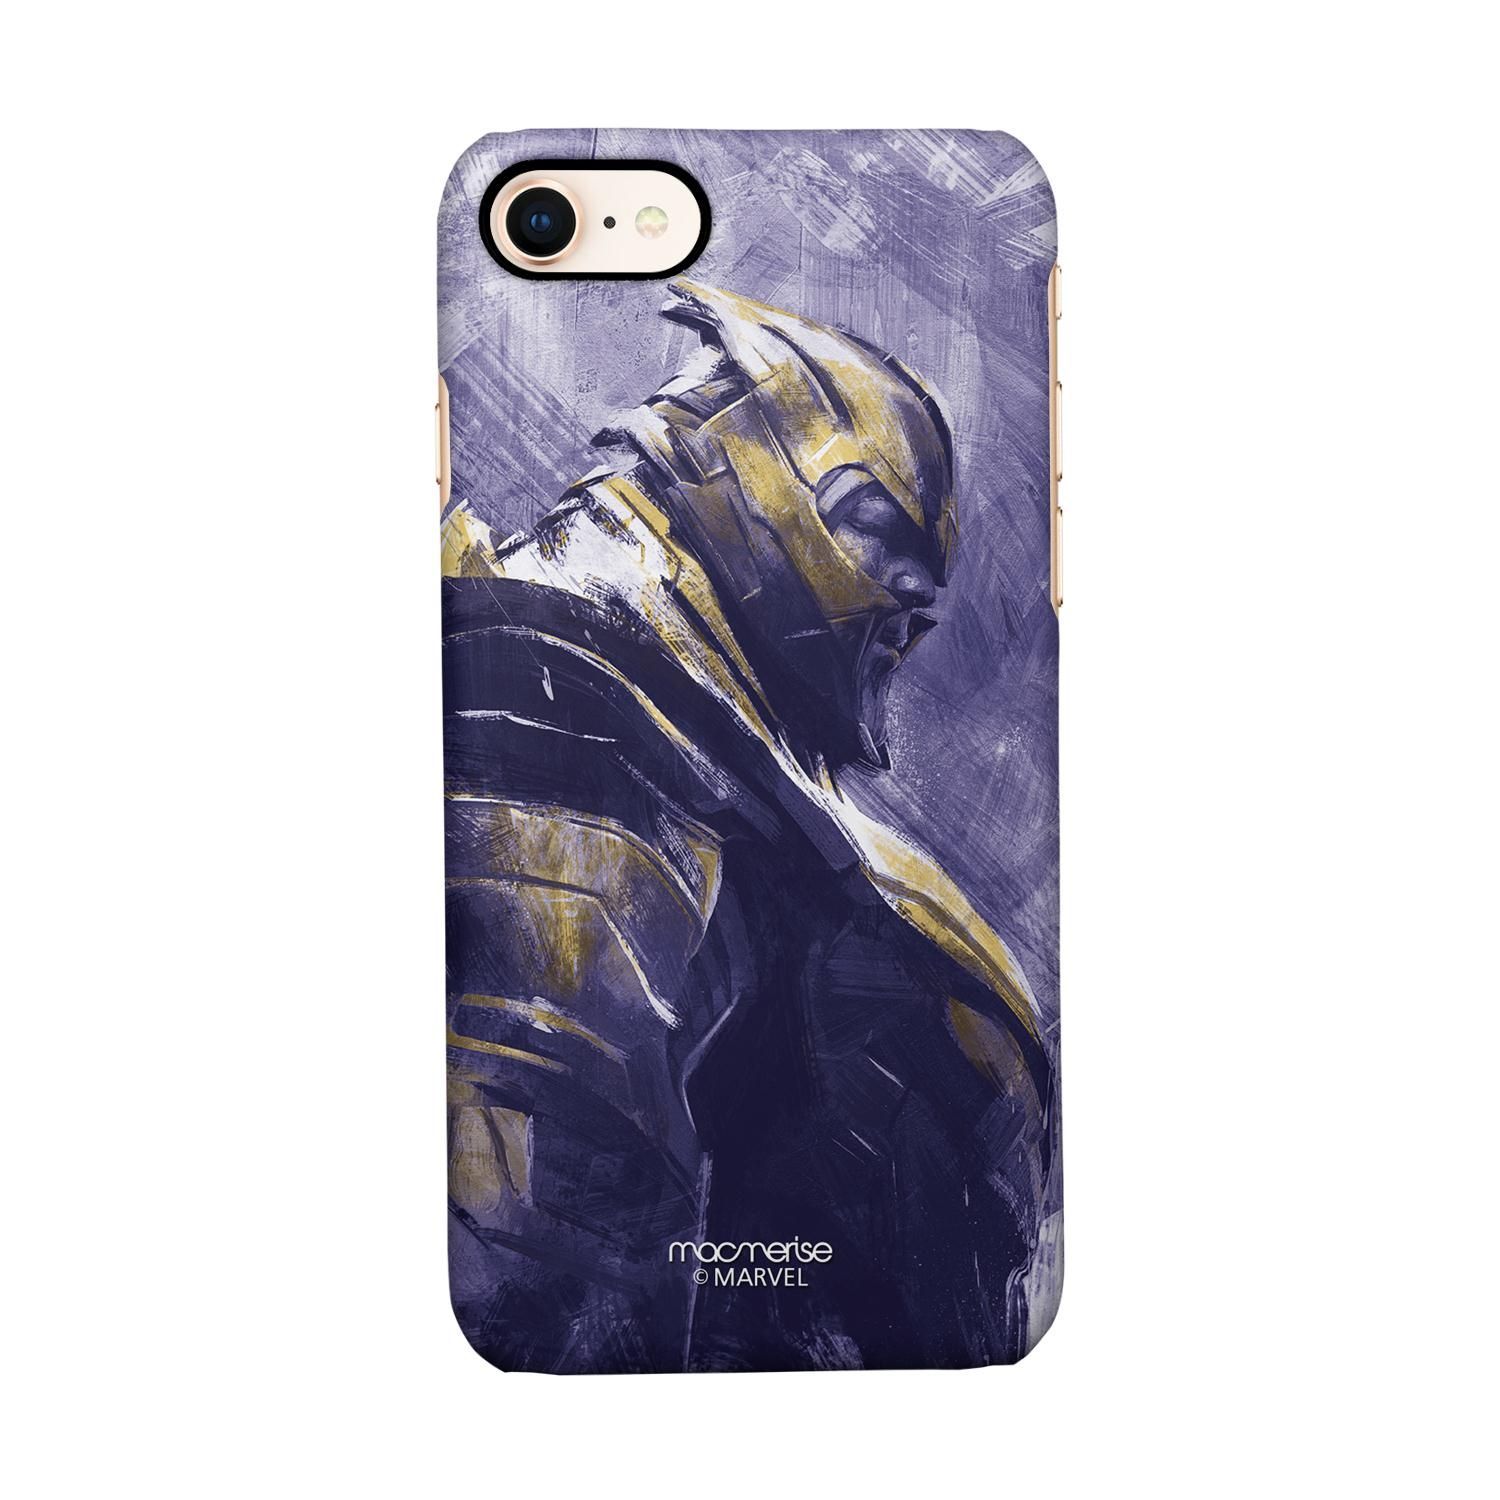 Buy Thanos suited up - Sleek Phone Case for iPhone 8 Online